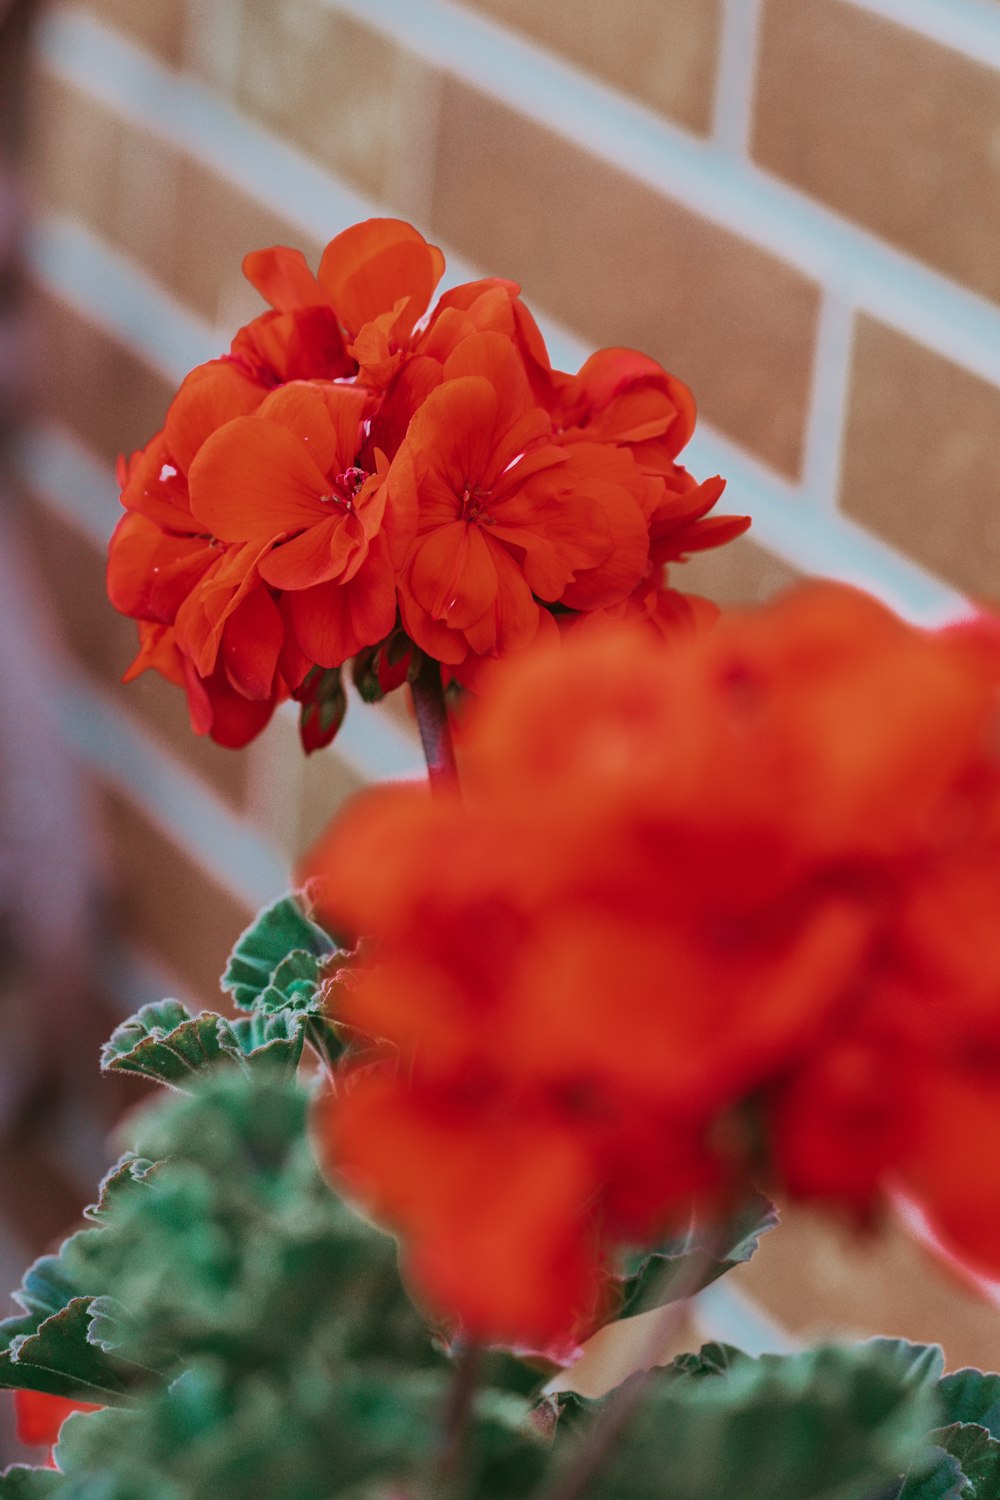 a close up of a red flower near a brick wall